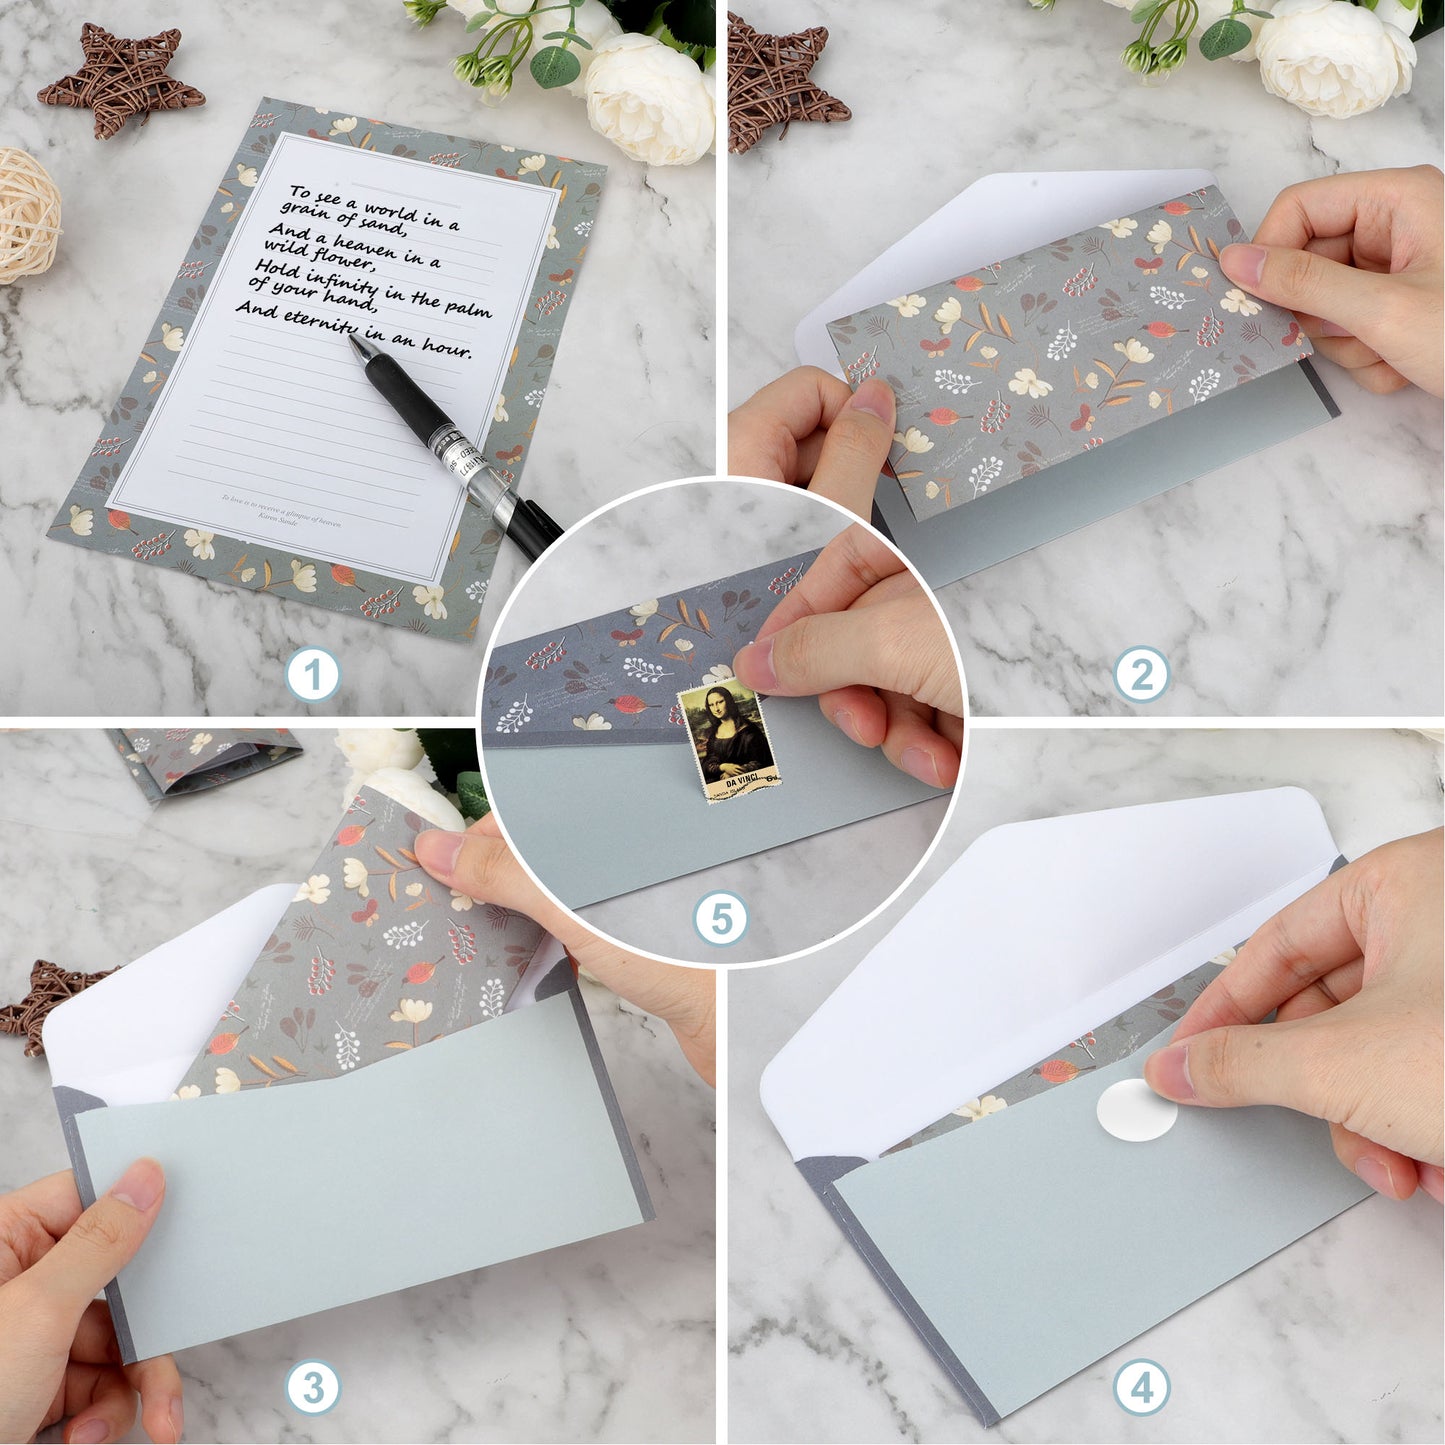 90 Pcs envelope and letter paper set - 10 Different Style writing paper stationery ,for Writing Letters Poem Office School Supplies